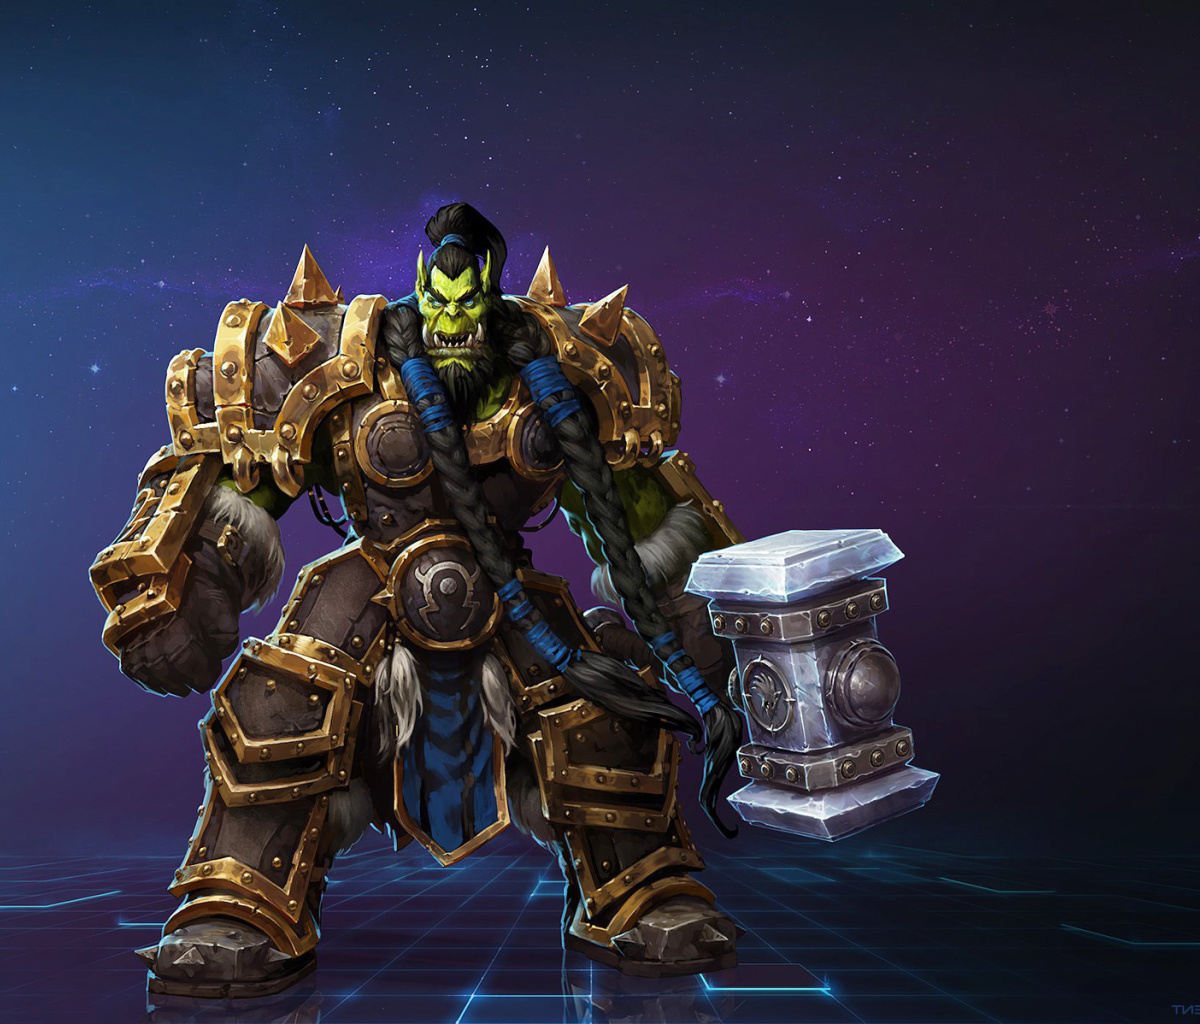 Das Heroes of the Storm multiplayer online battle arena video game Wallpaper 1200x1024